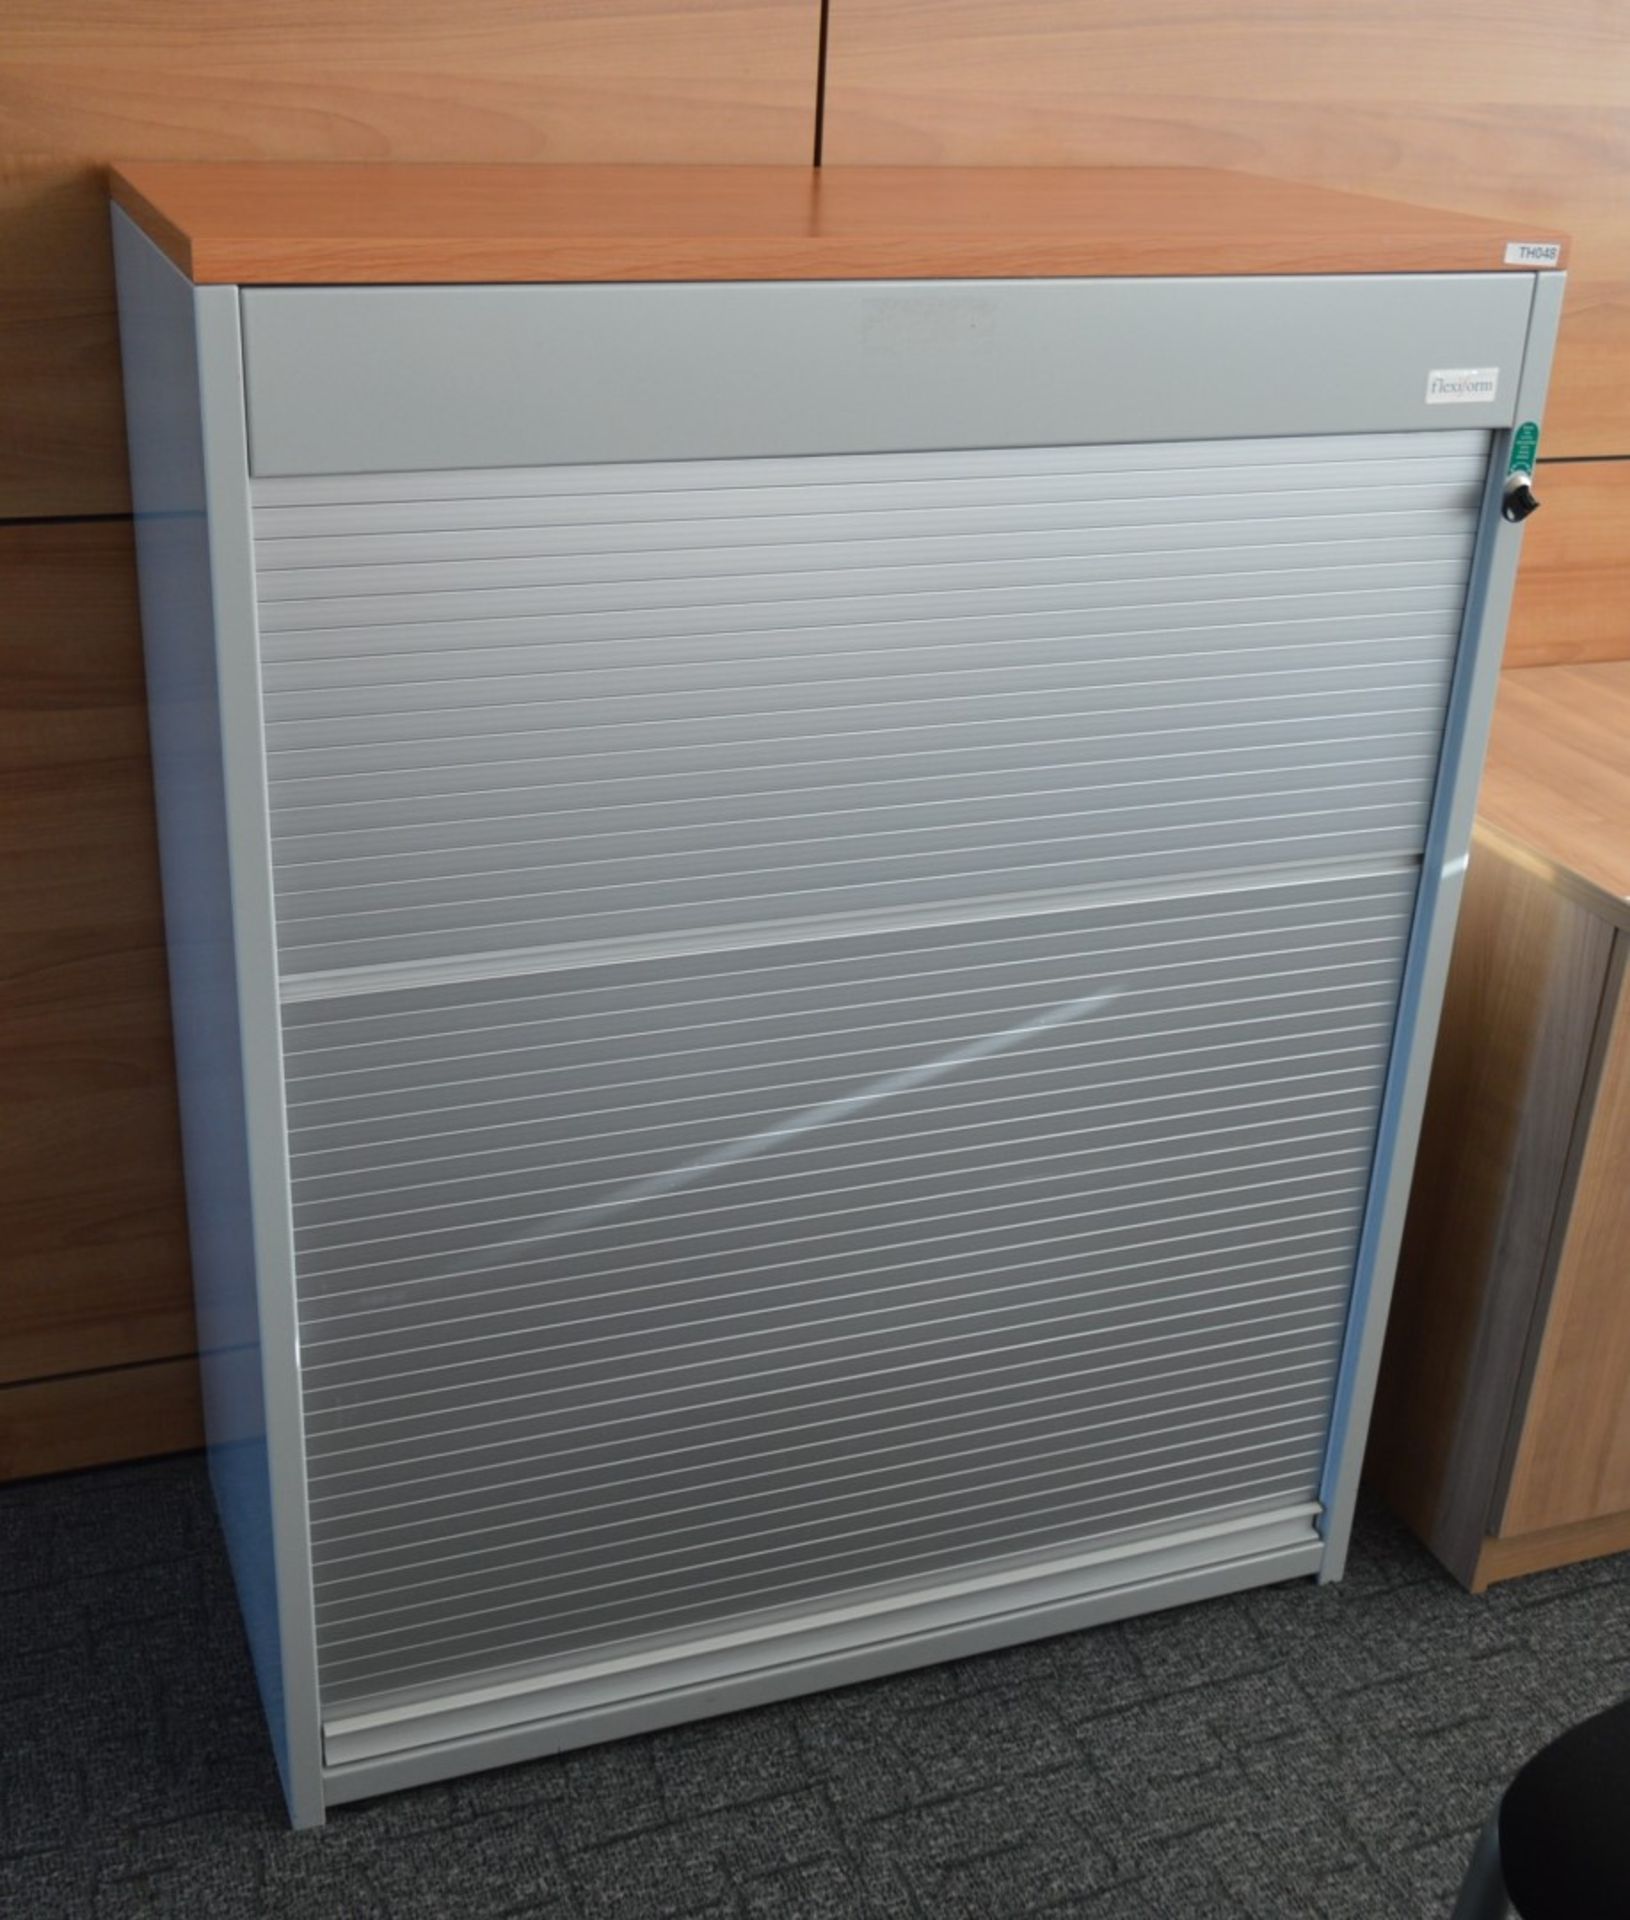 1 x Flexiform Tambour Door Office Storage Cabinet - Grey and Beech Finish - High Quality Office